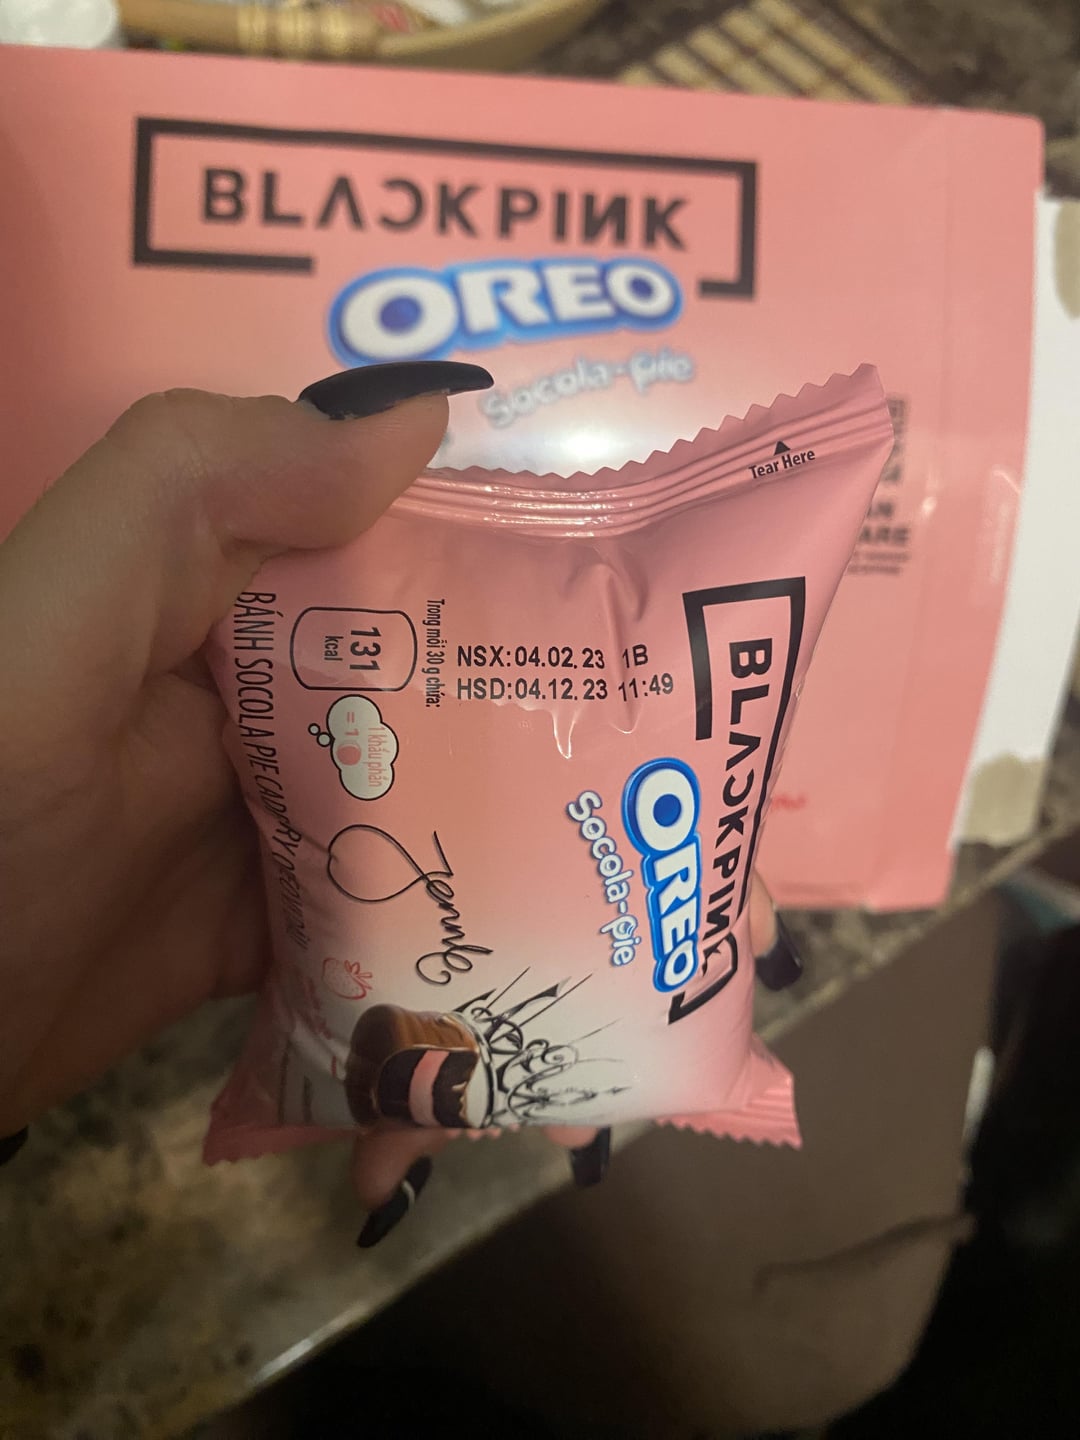 230927 I bought the blackpink socopies a couple months ago and was wondering if anyone knows what the expiration date is on them? Here are some pics